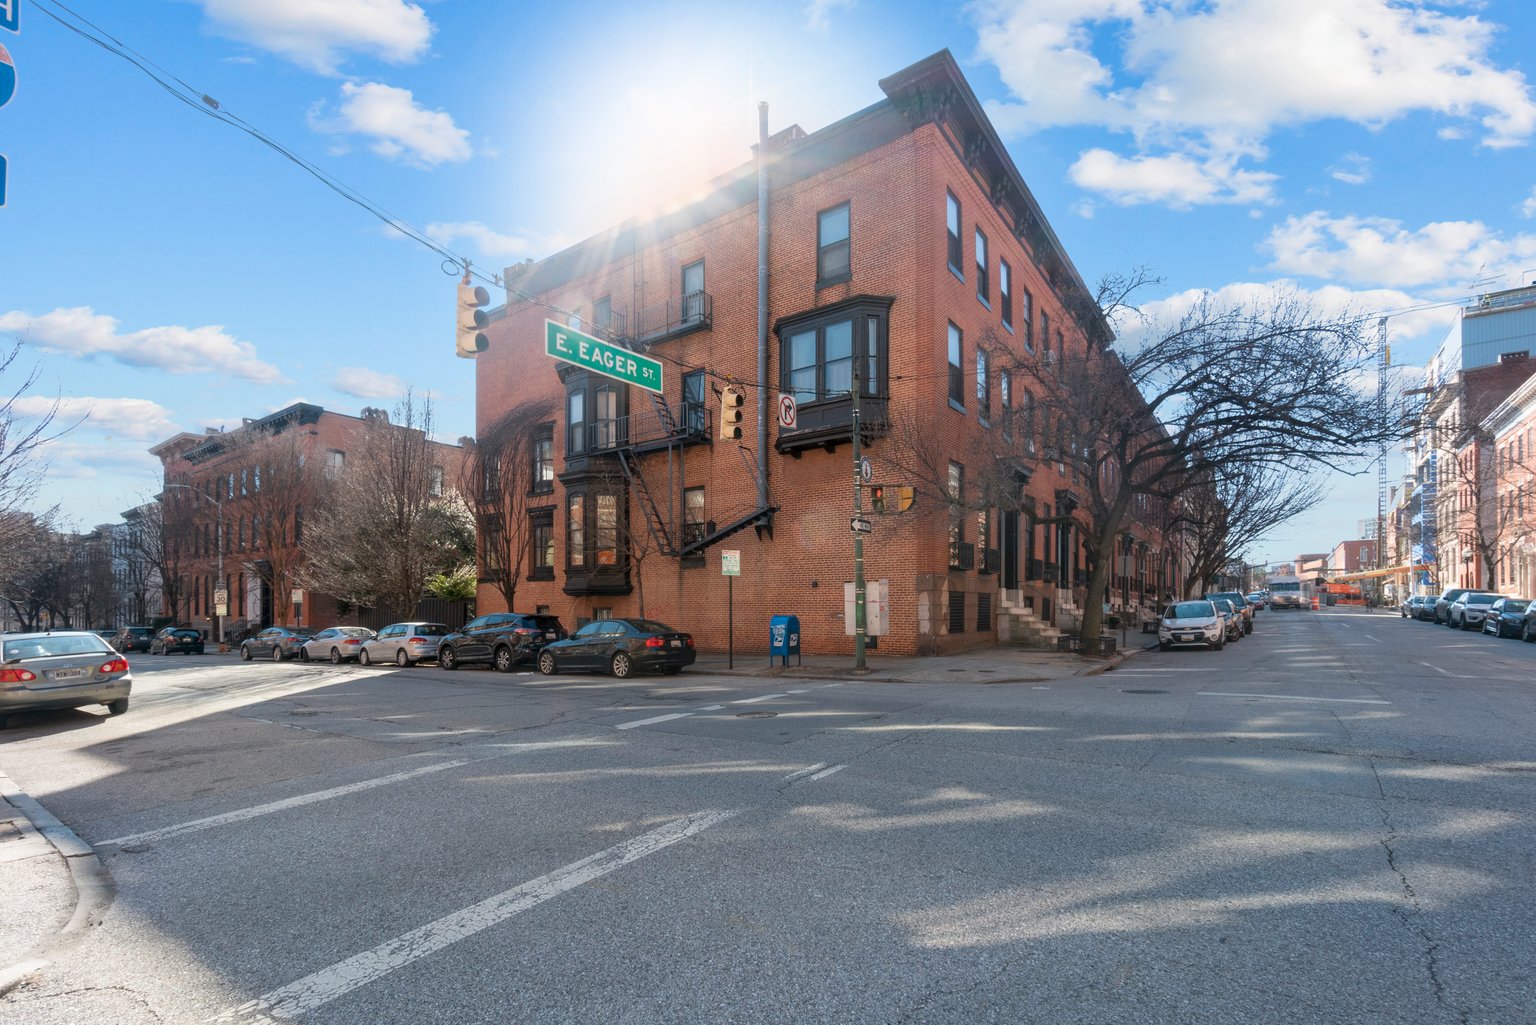 23 East Eager Street: 5 Apts. in the heart of Historic Mt. Vernon/ End Unit/ Fully Leased